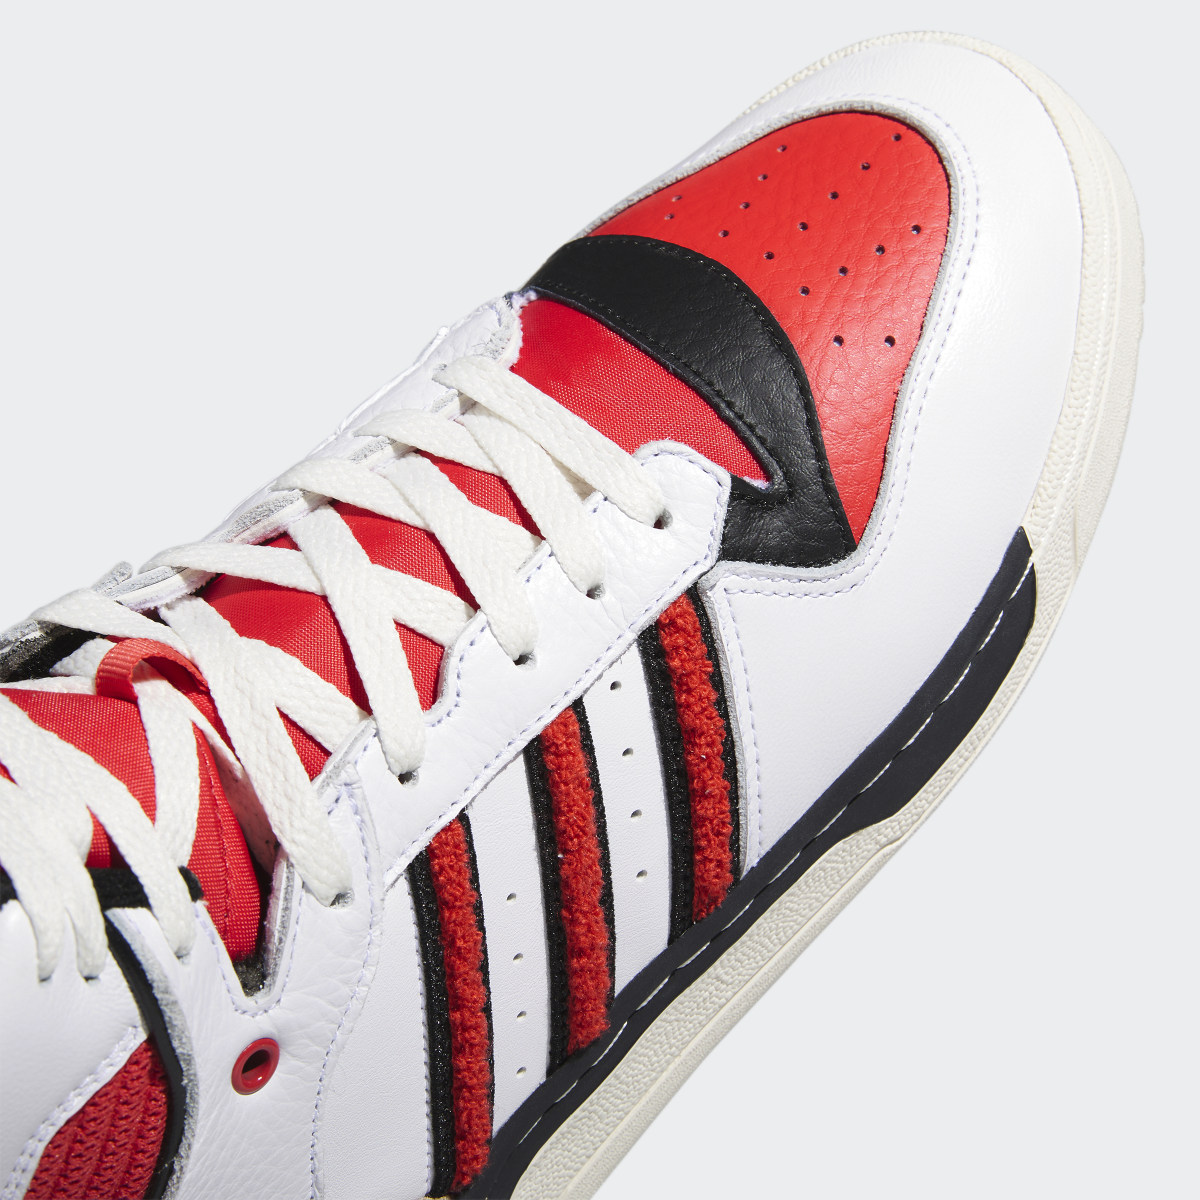 Adidas Rivalry High Shoes. 10